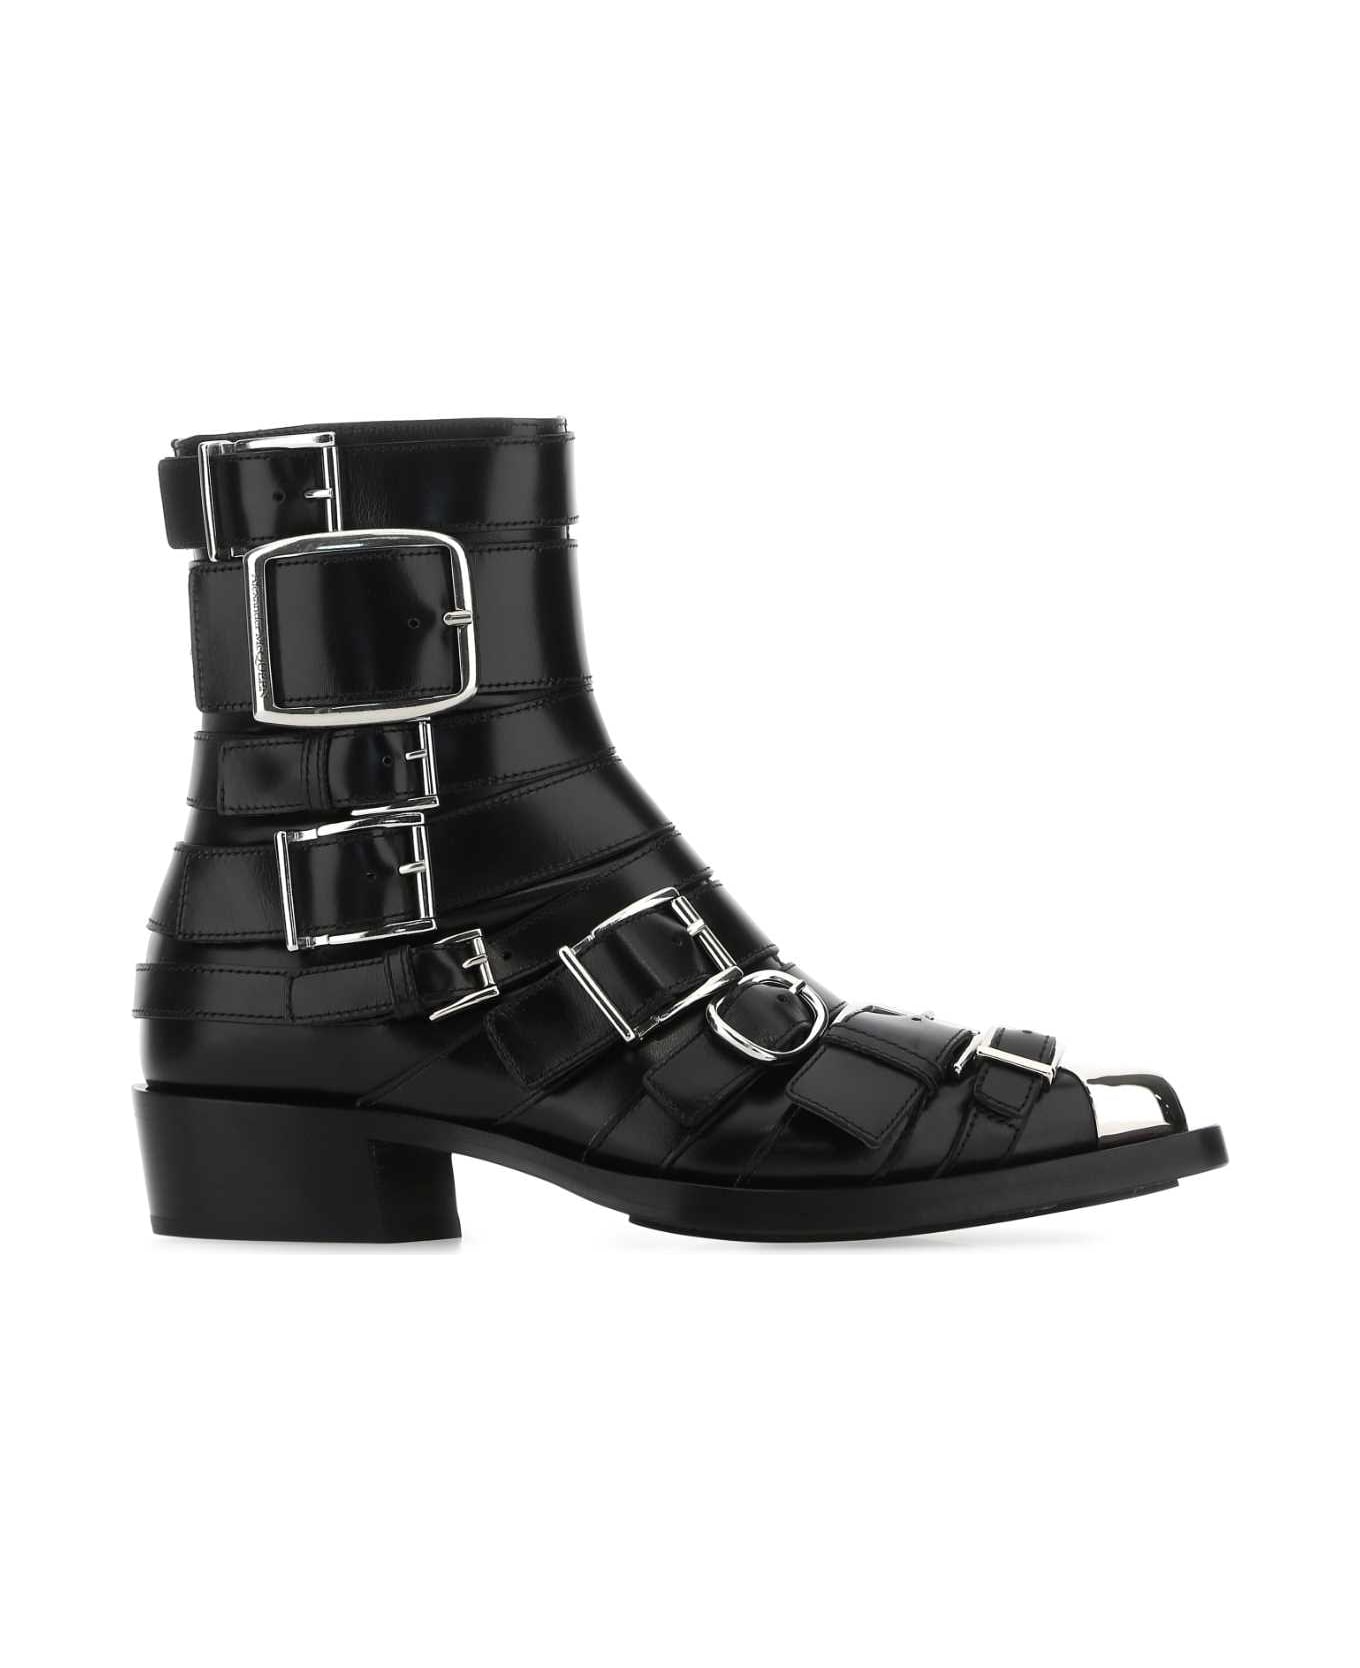 Alexander McQueen Black Leather Punk Ankle Boots - 1081 ブーツ